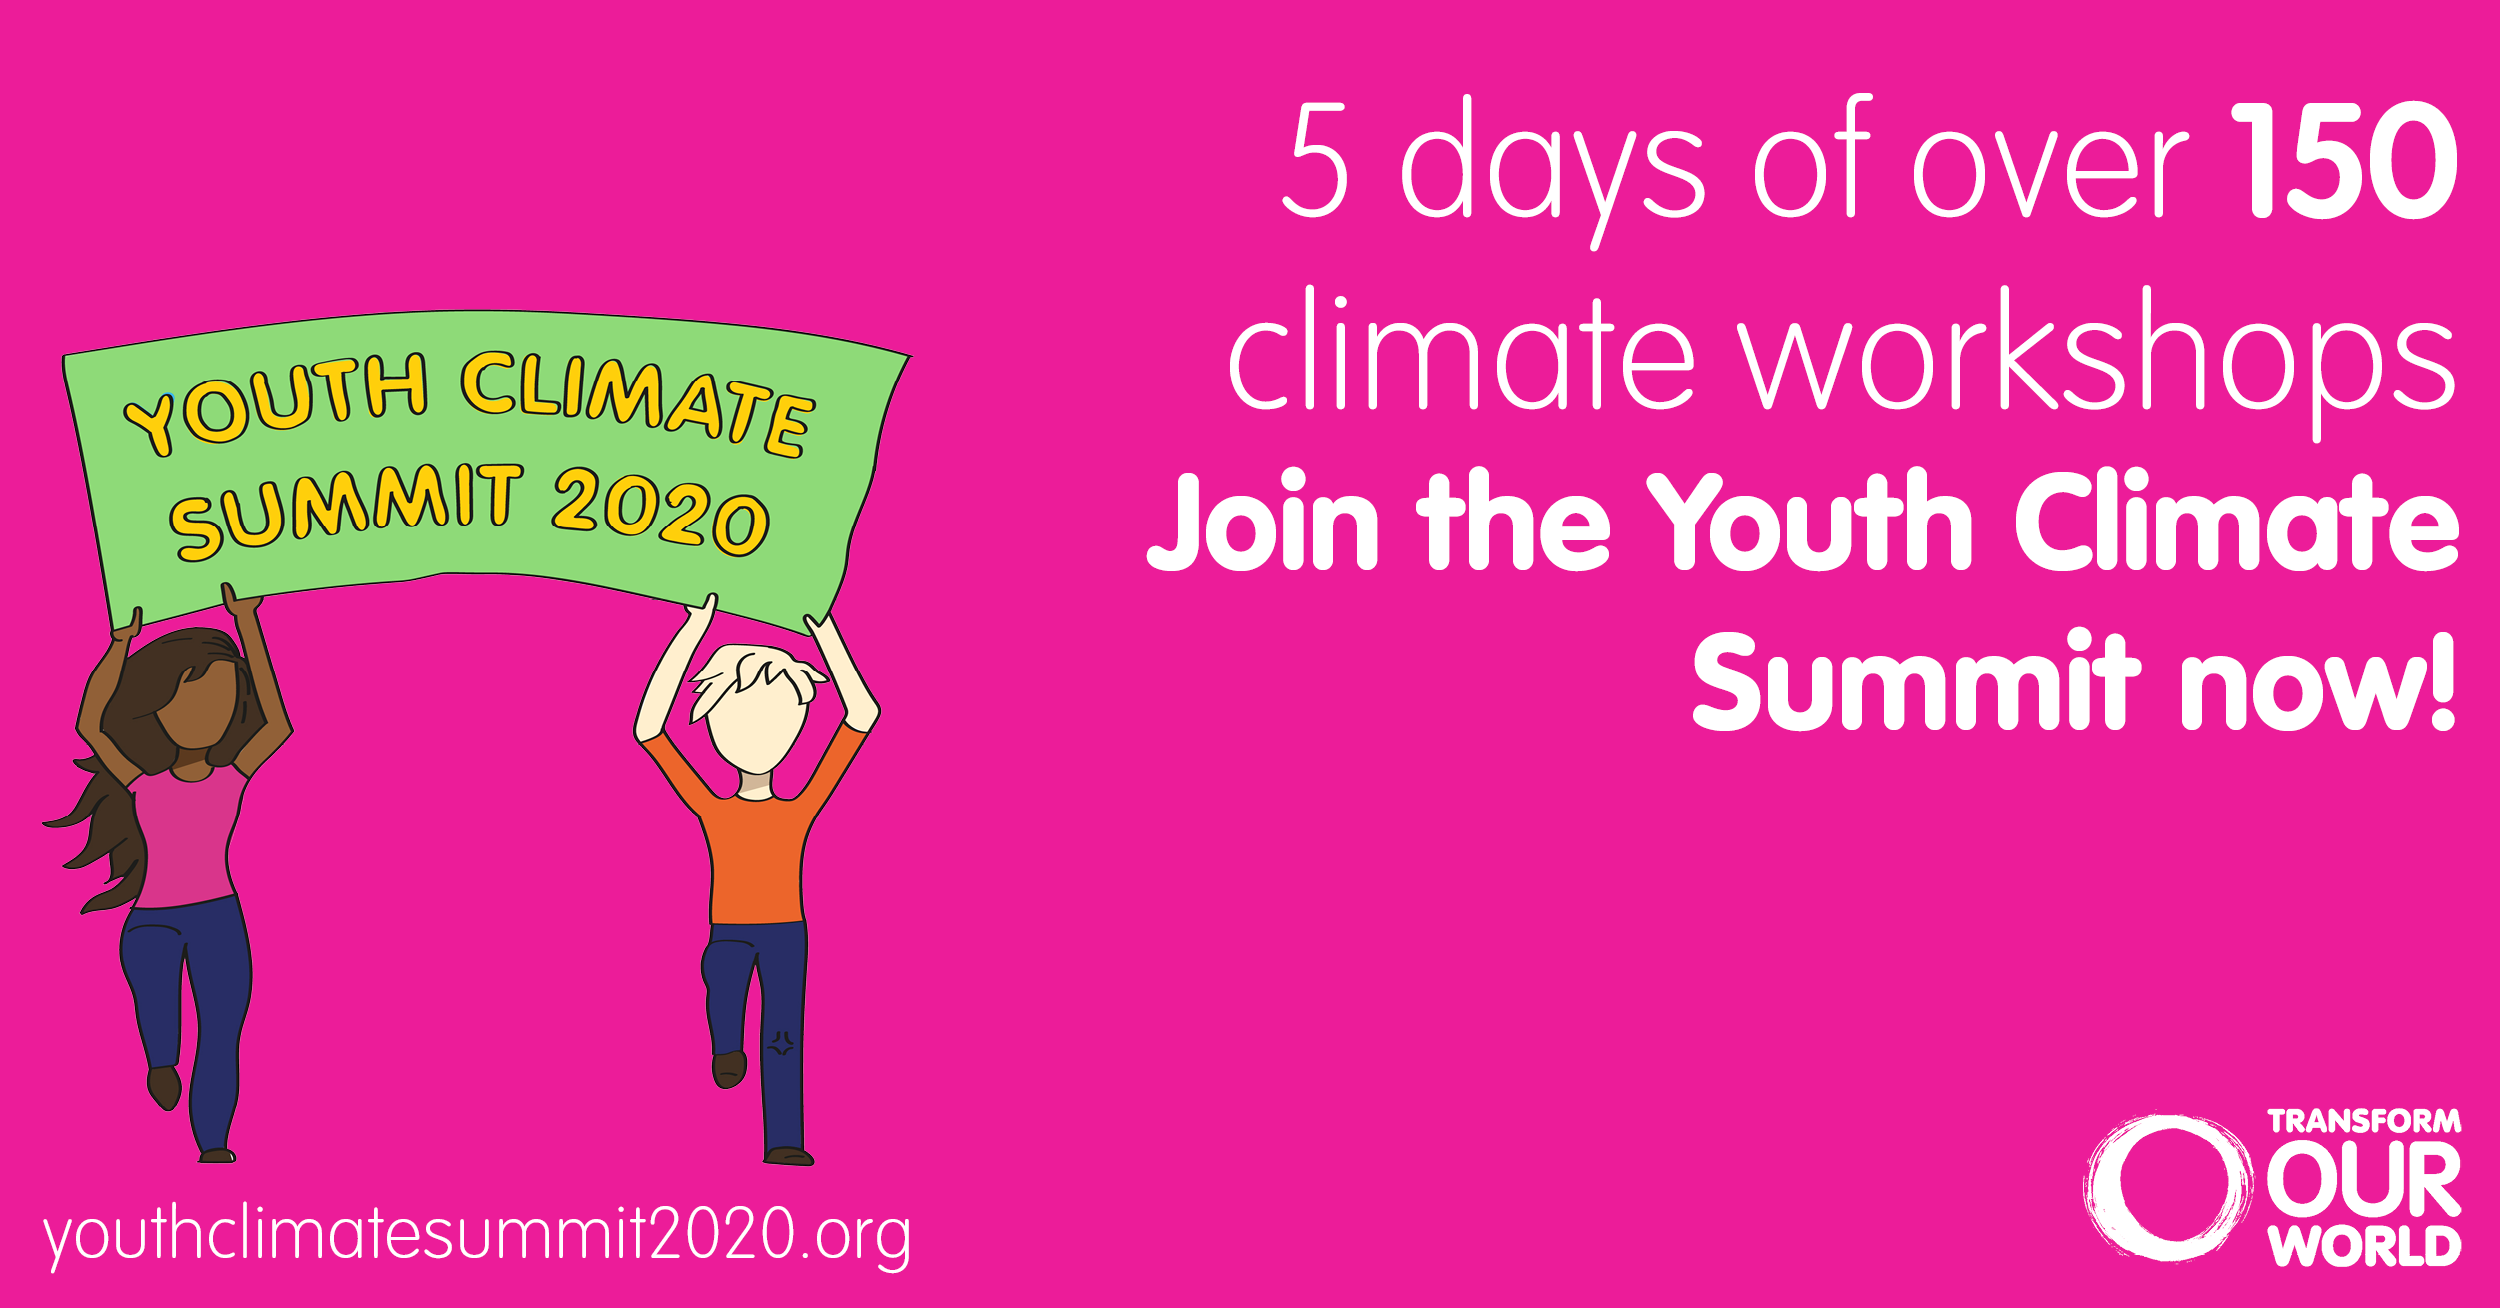 Youth climate summit banner saying 5 days of over 150 climate workshops. Join the Youth Climate Summit now.